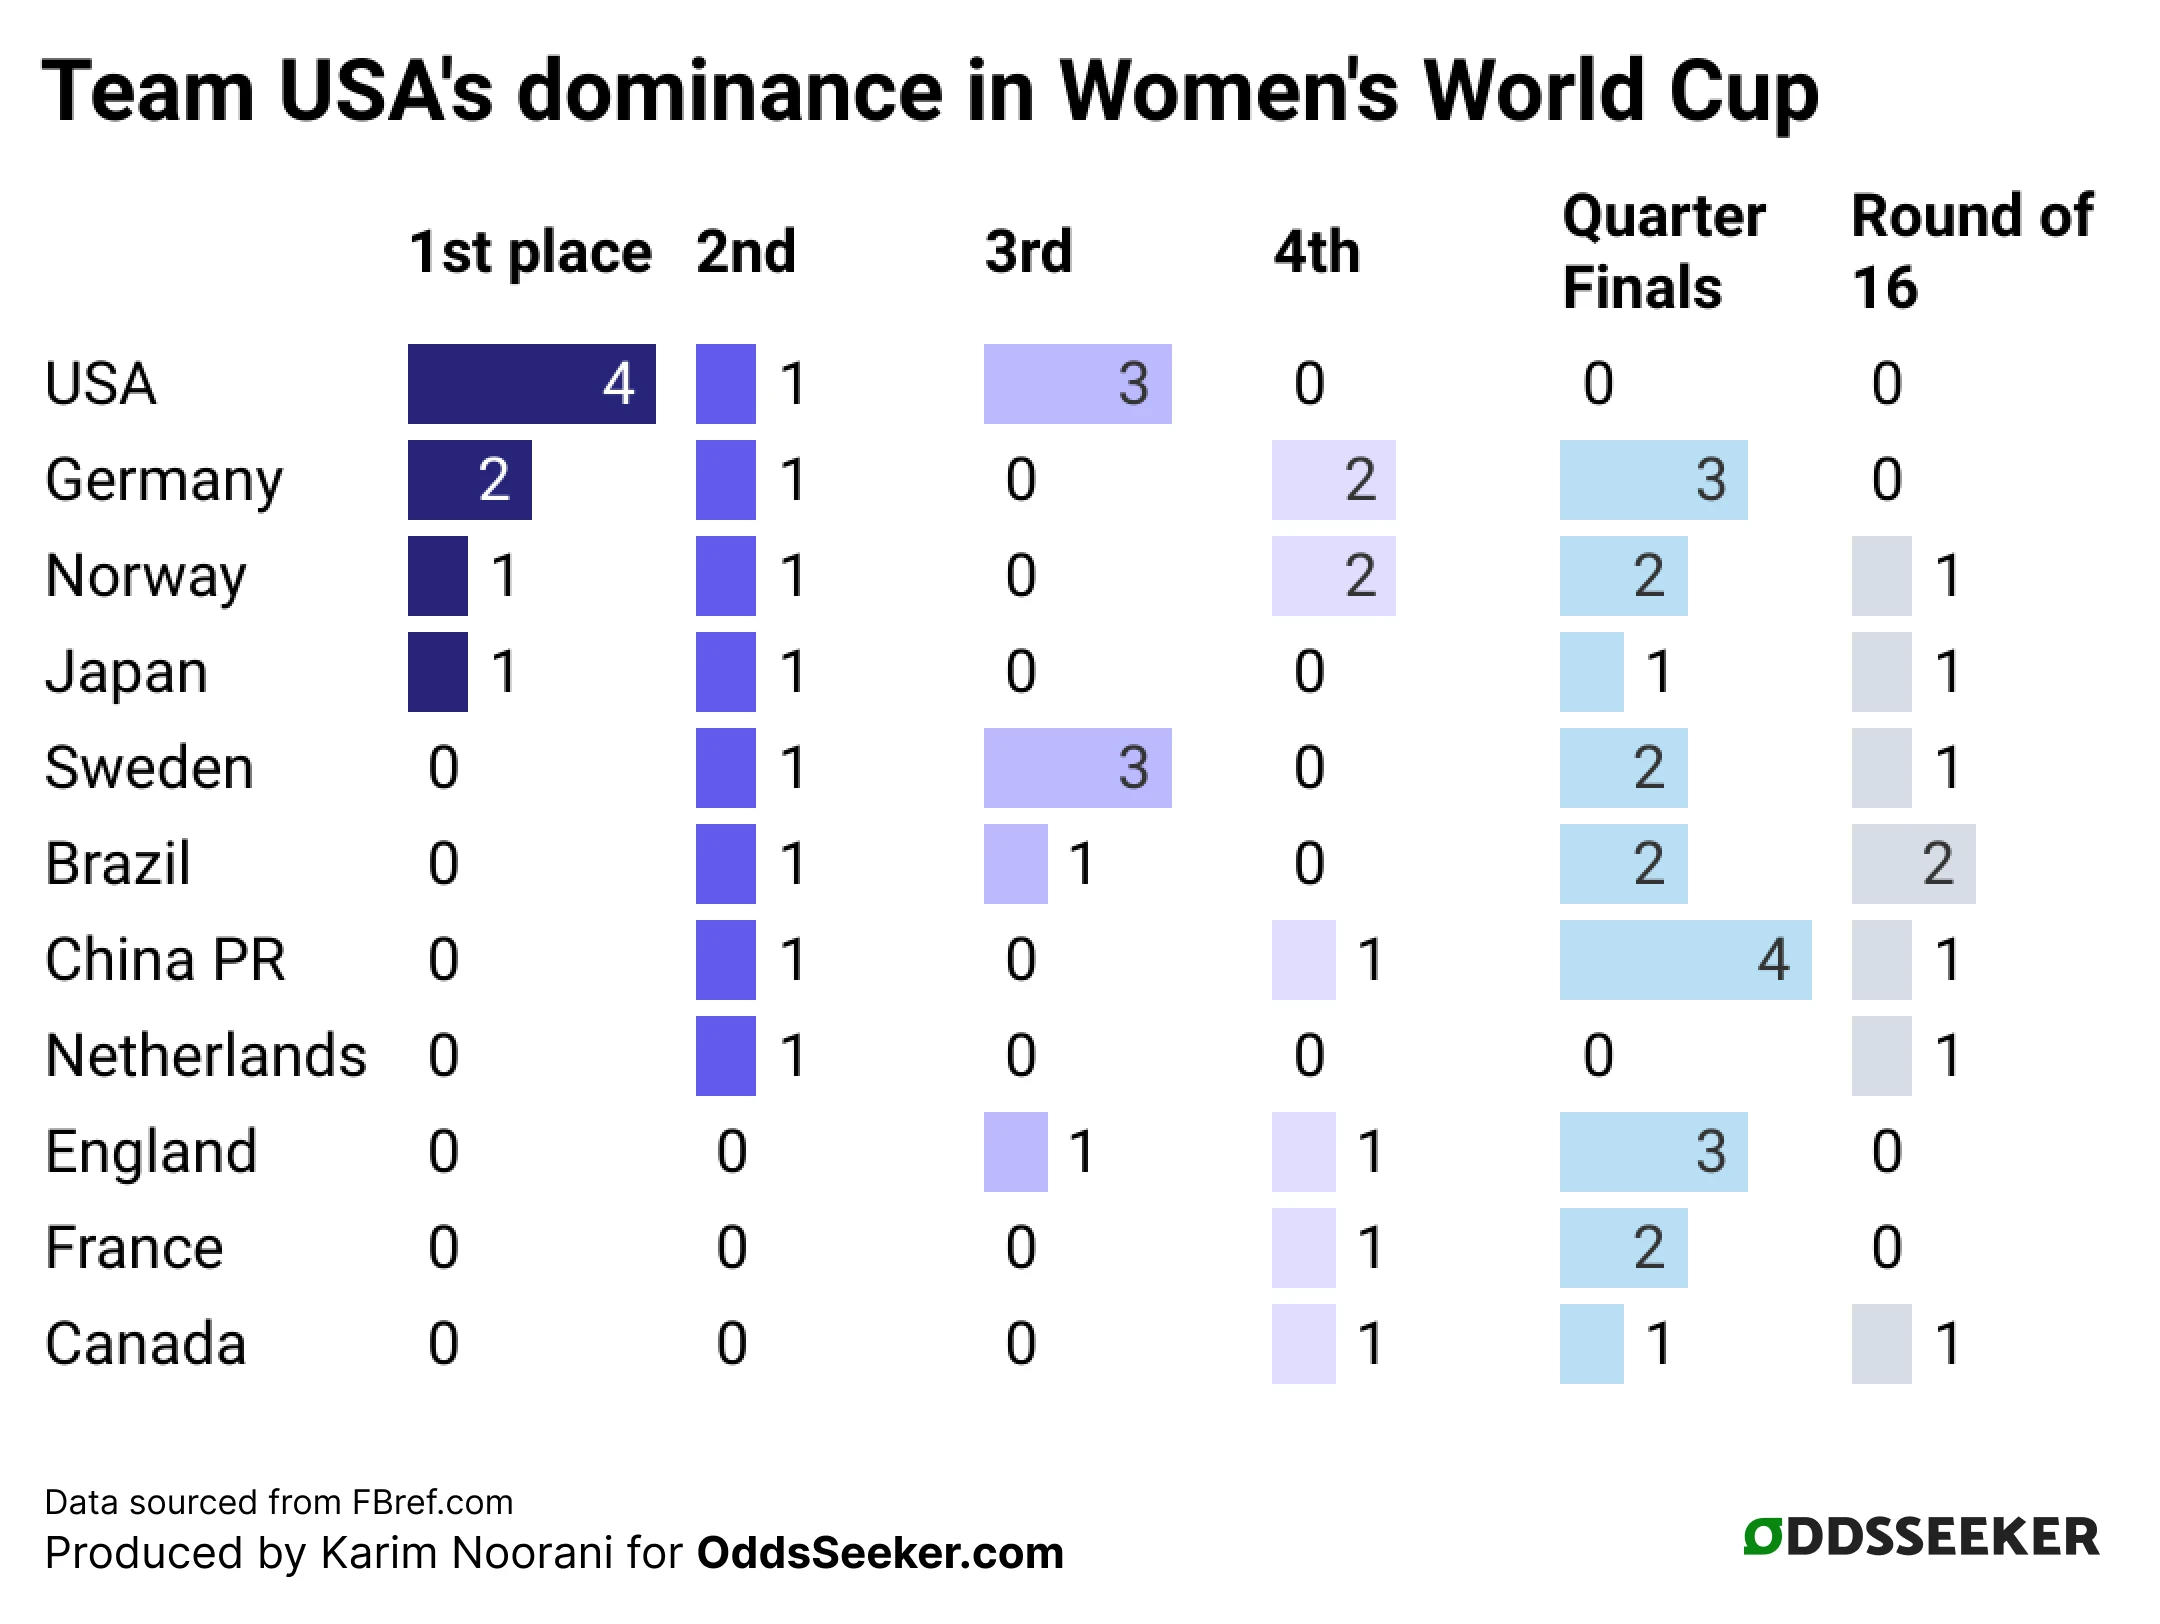 A data table showing that the United States is the most successful country in Women's World Cup history, tallying four first place finishes.